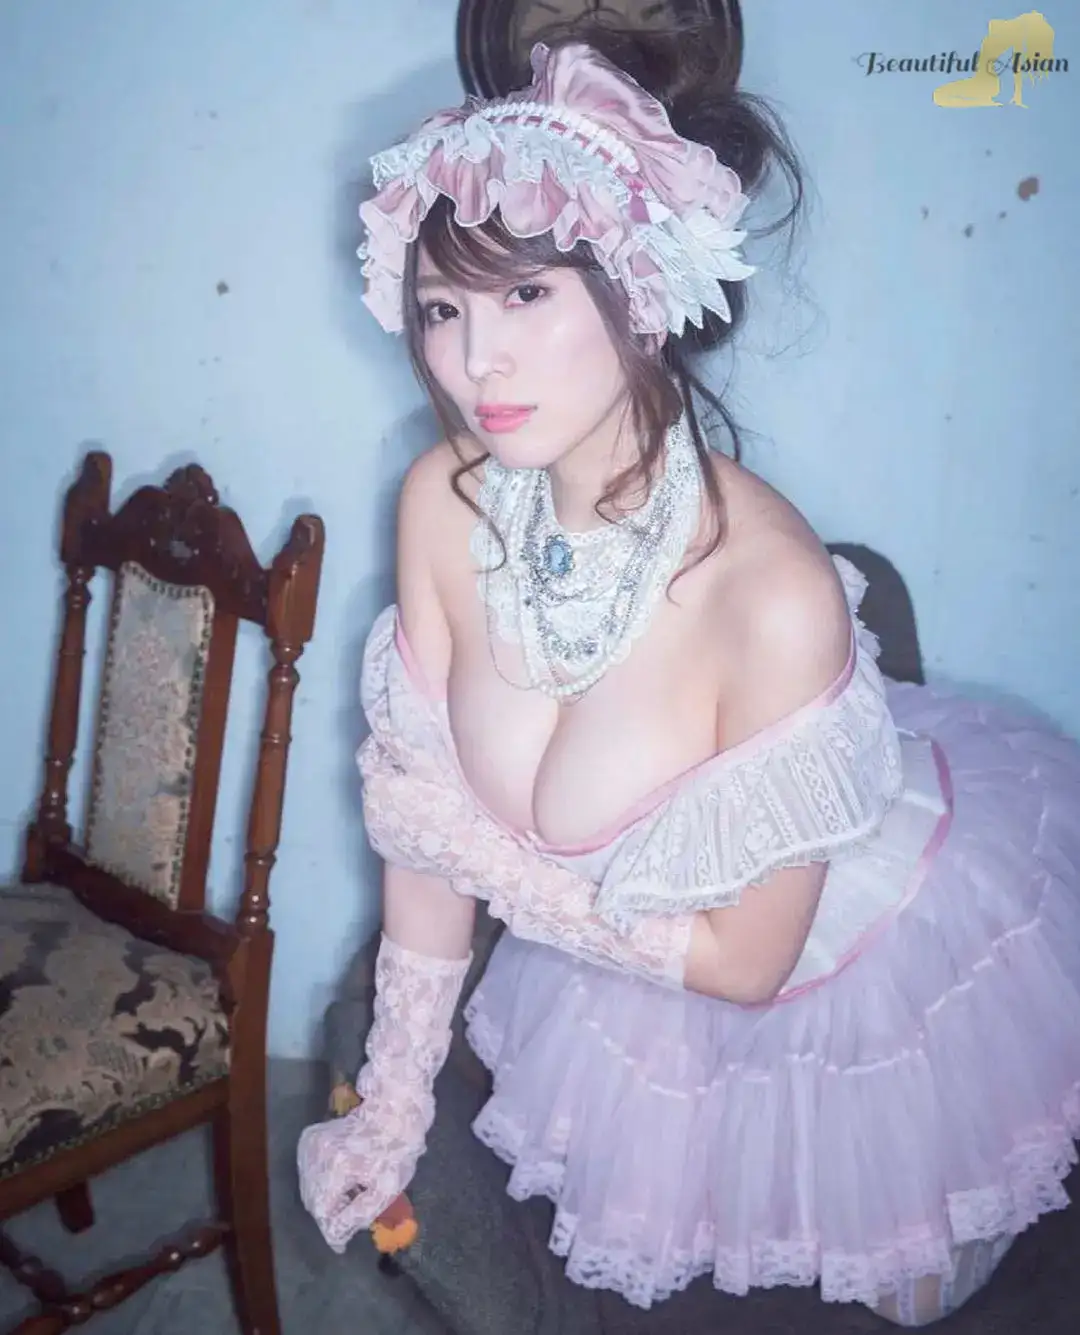 alluring woman from Japan